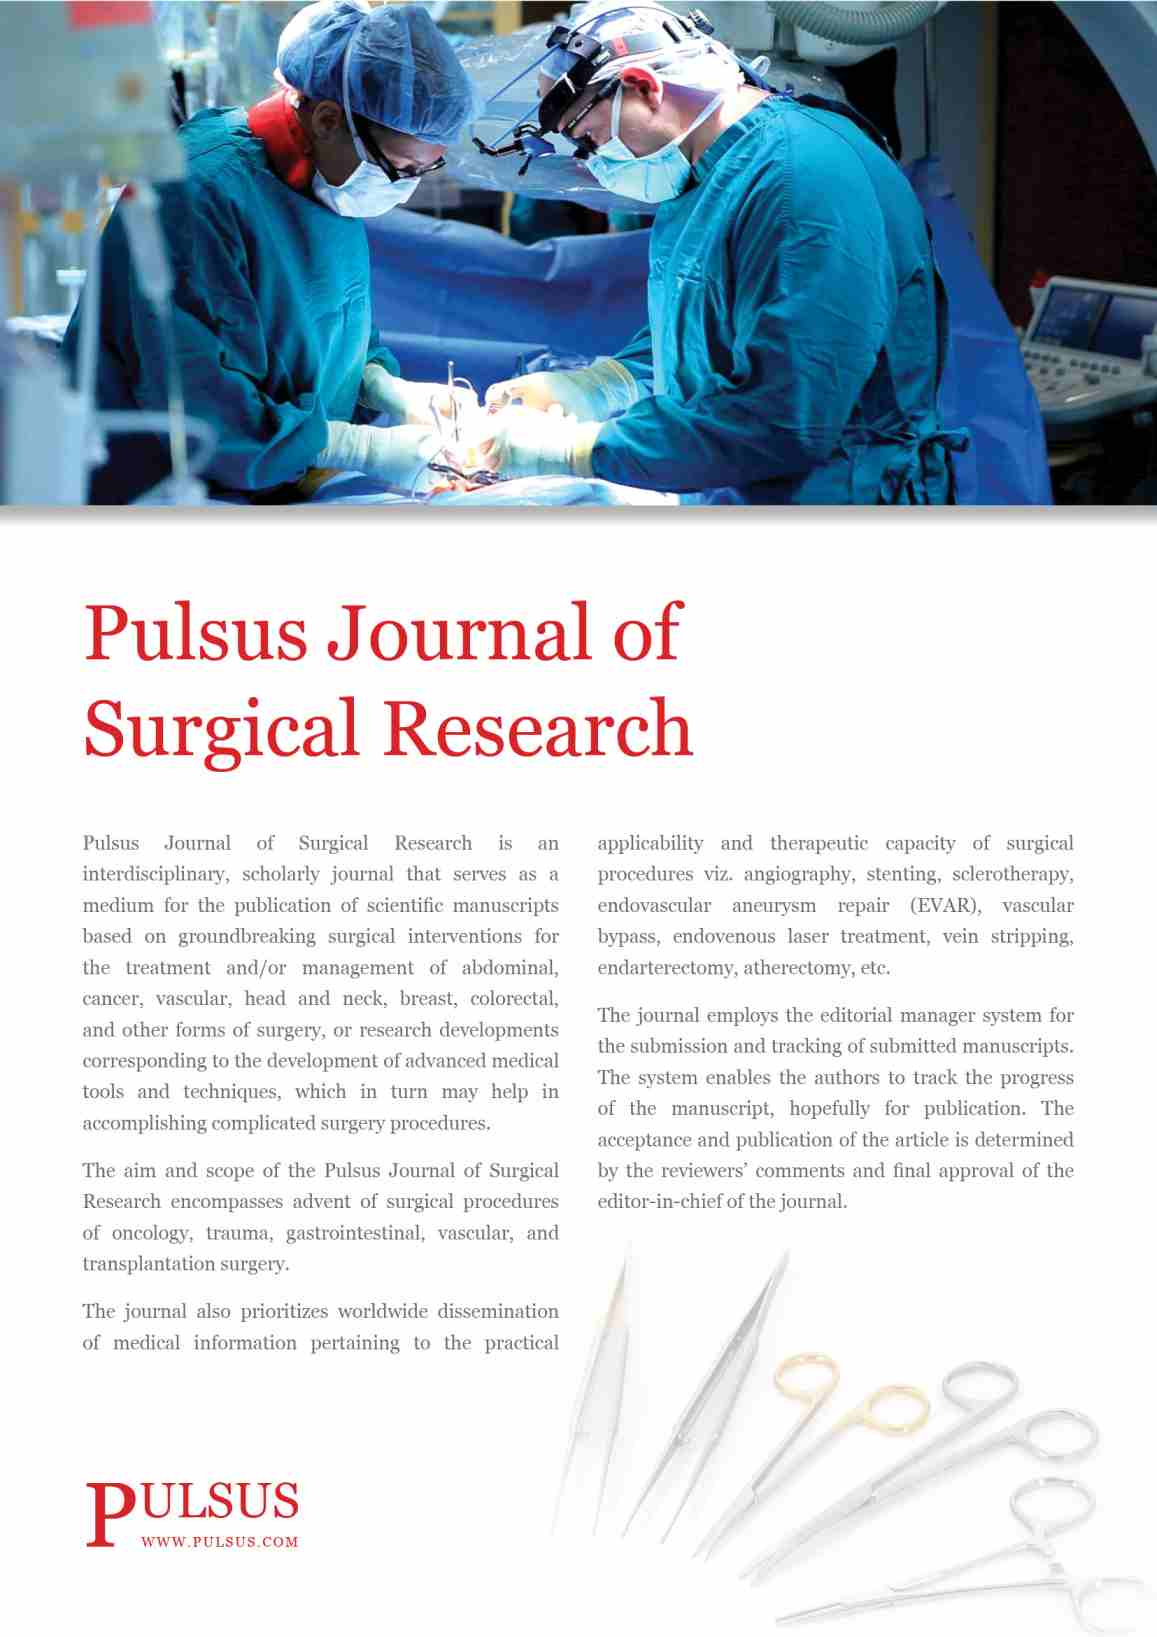 Pulsus Journal of Surgical Research